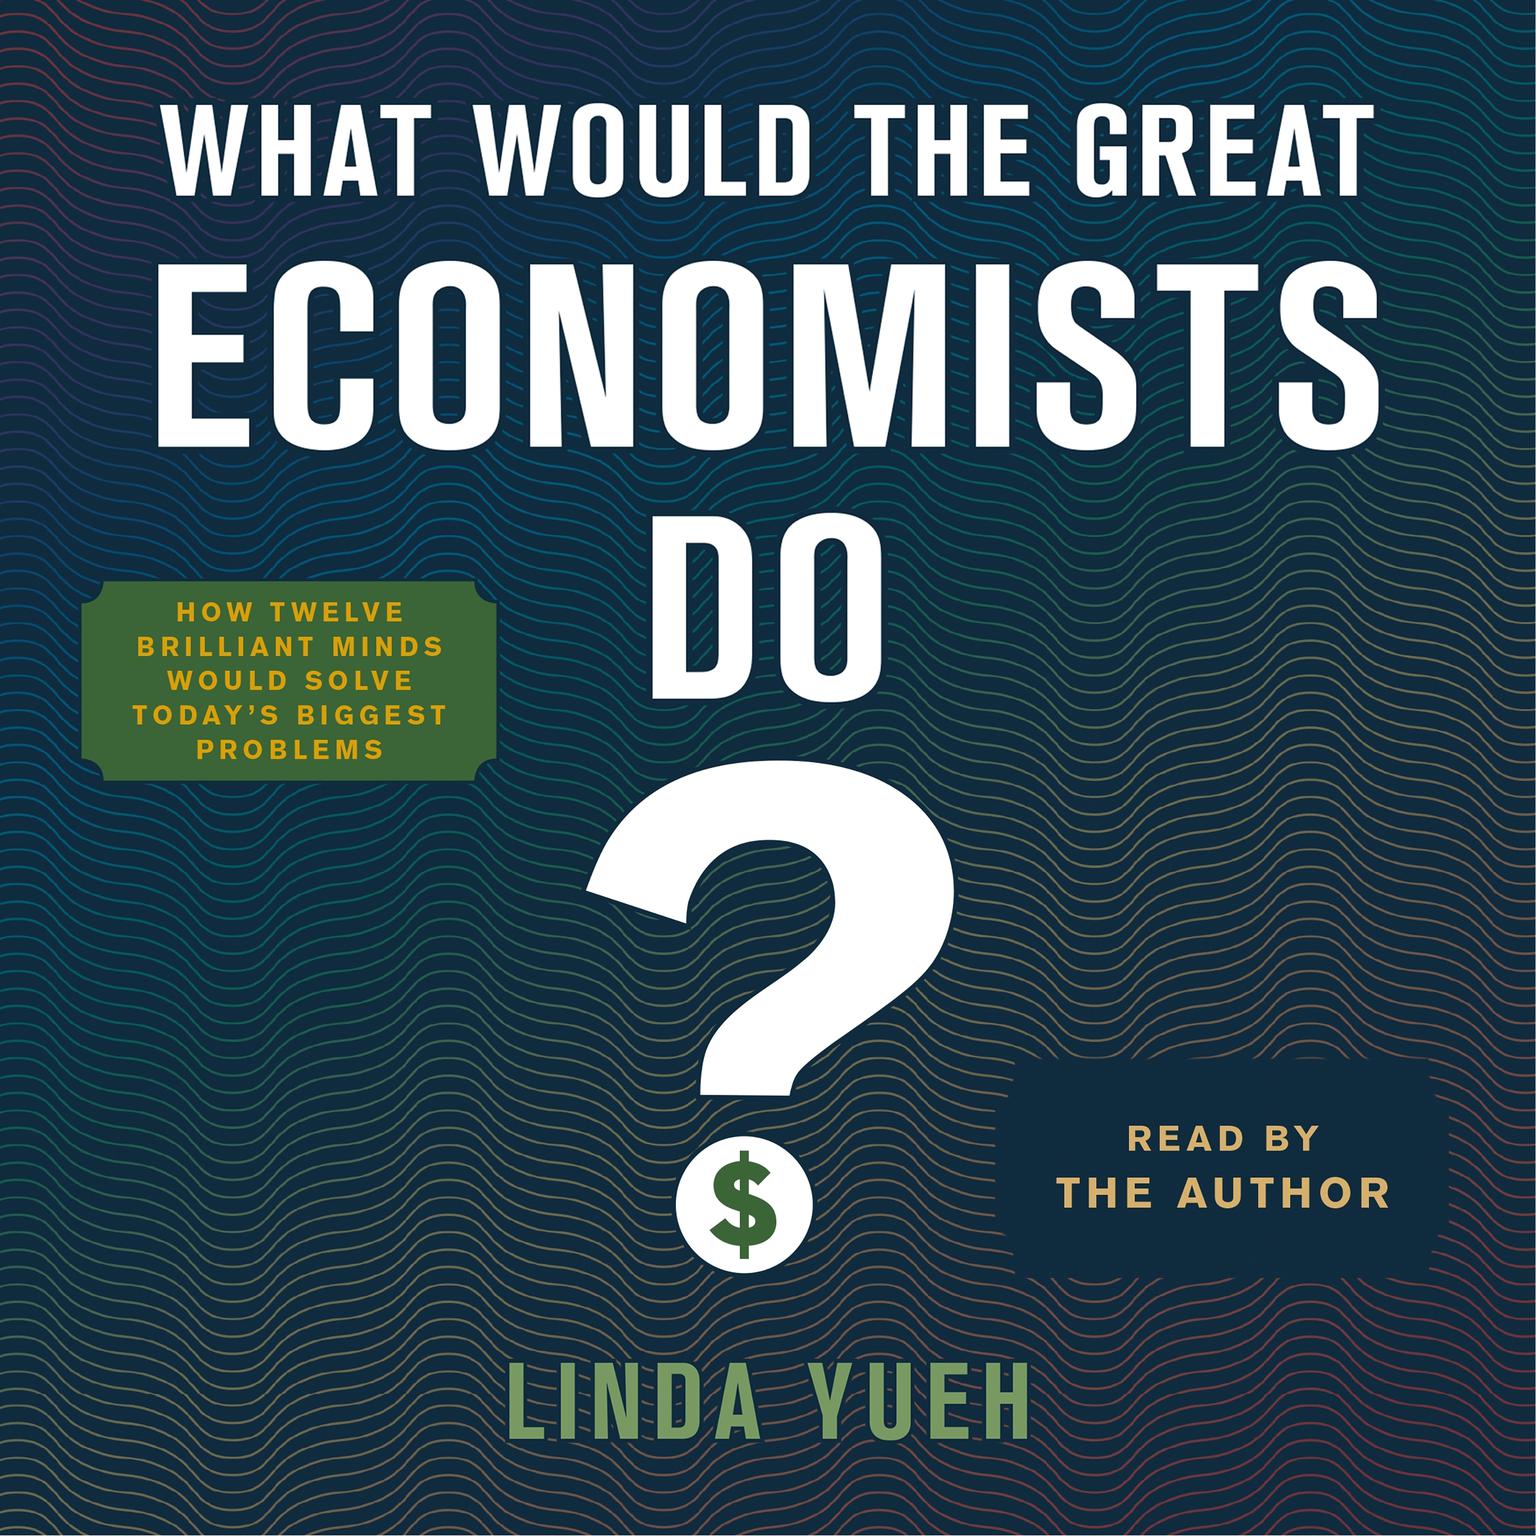 What Would the Great Economists Do?: How Twelve Brilliant Minds Would Solve Todays Biggest Problems Audiobook, by Linda Yueh